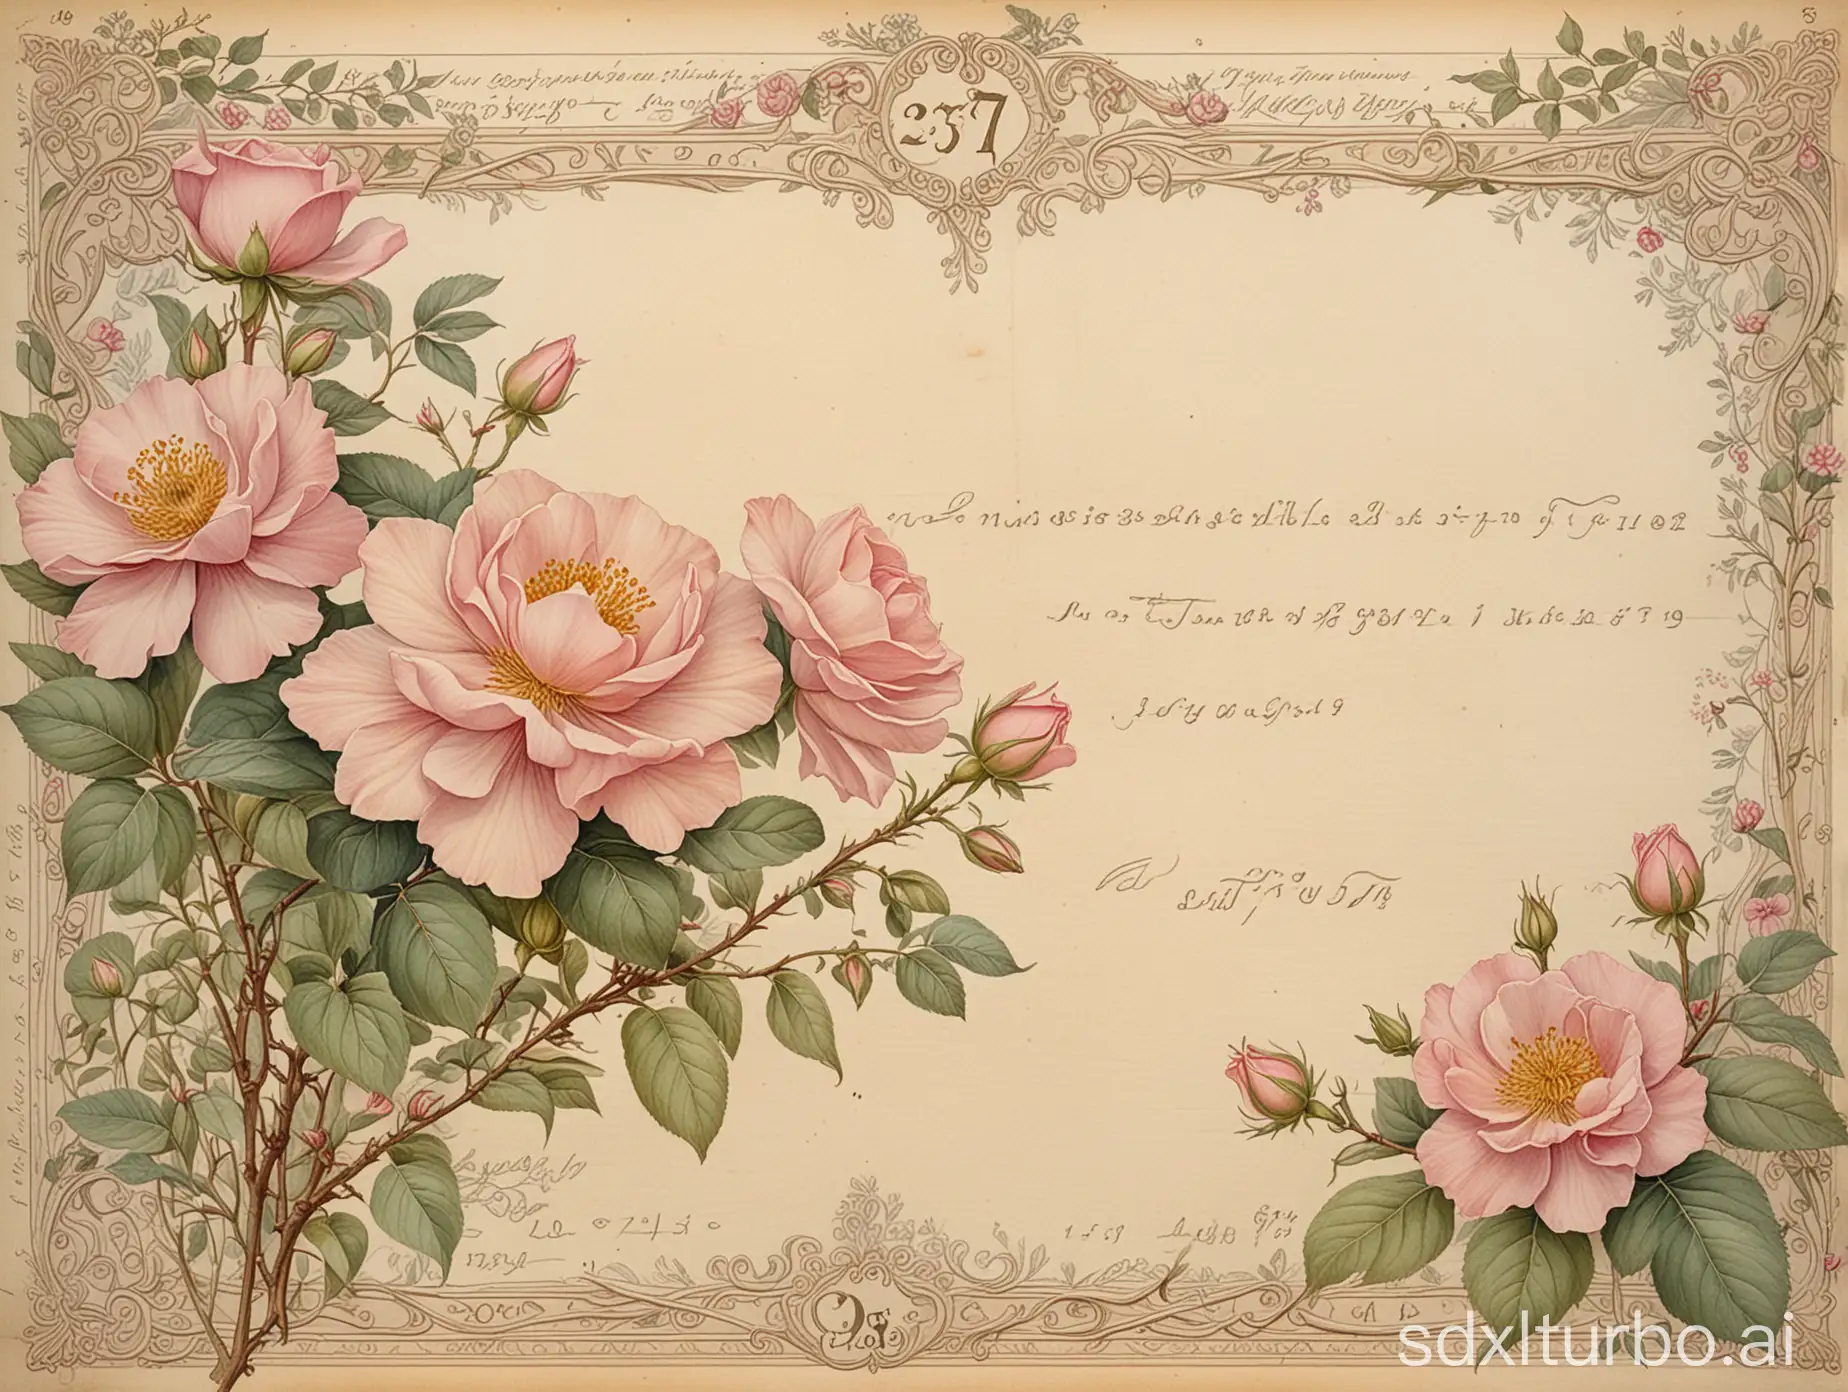 an old vintage ledger paper with handwritten numbers, bordered with delicate pale pink Wildroses, art nouveau embellishments, richly detailed delicate and intricate drawing and watercolor painting